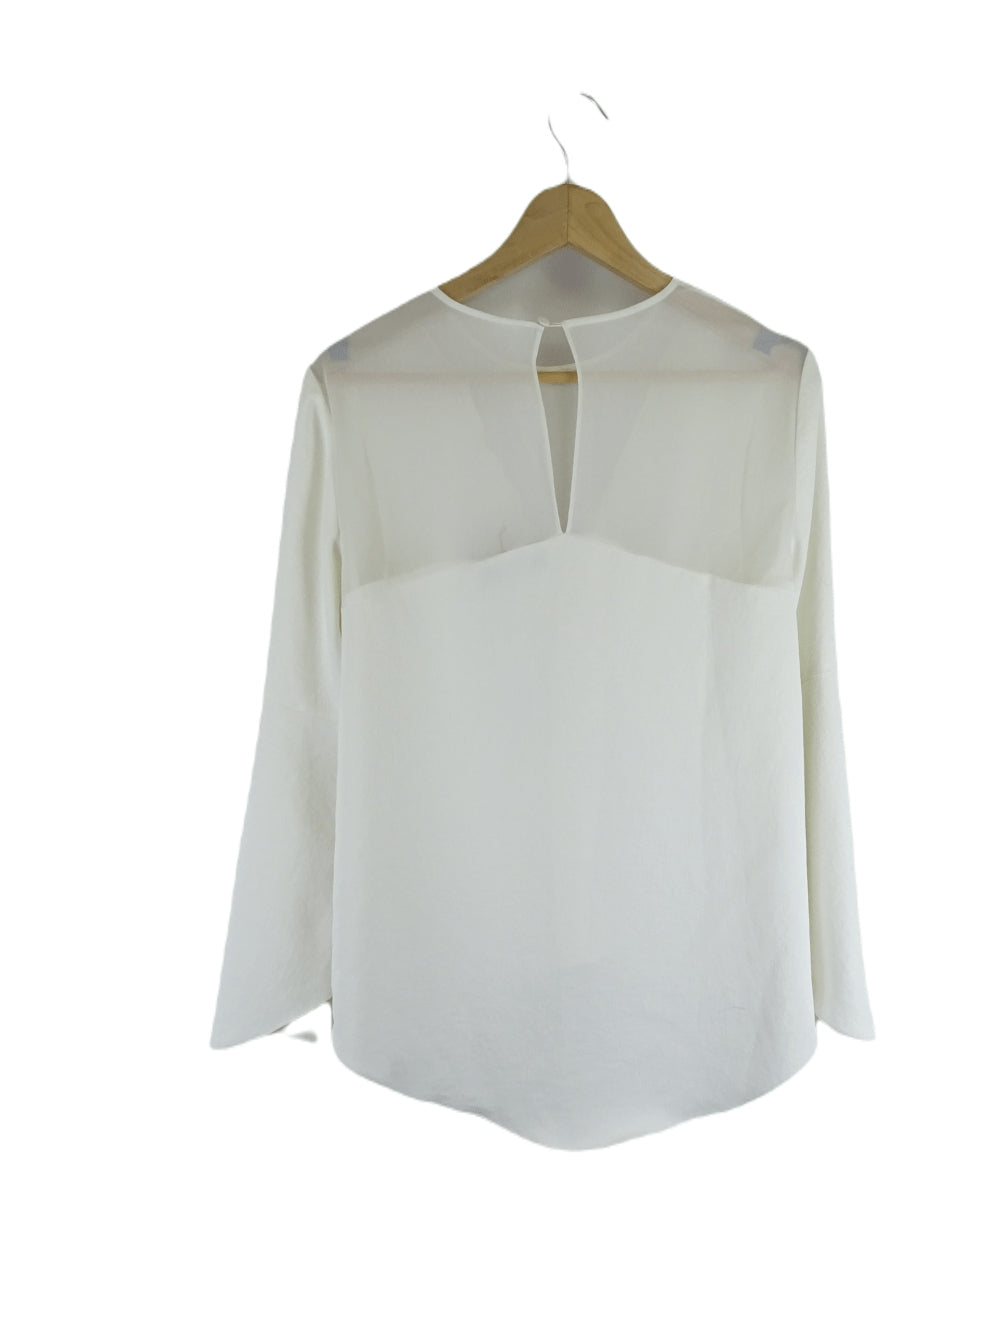 Luxe Deluxe White Long Sleeve Top 10